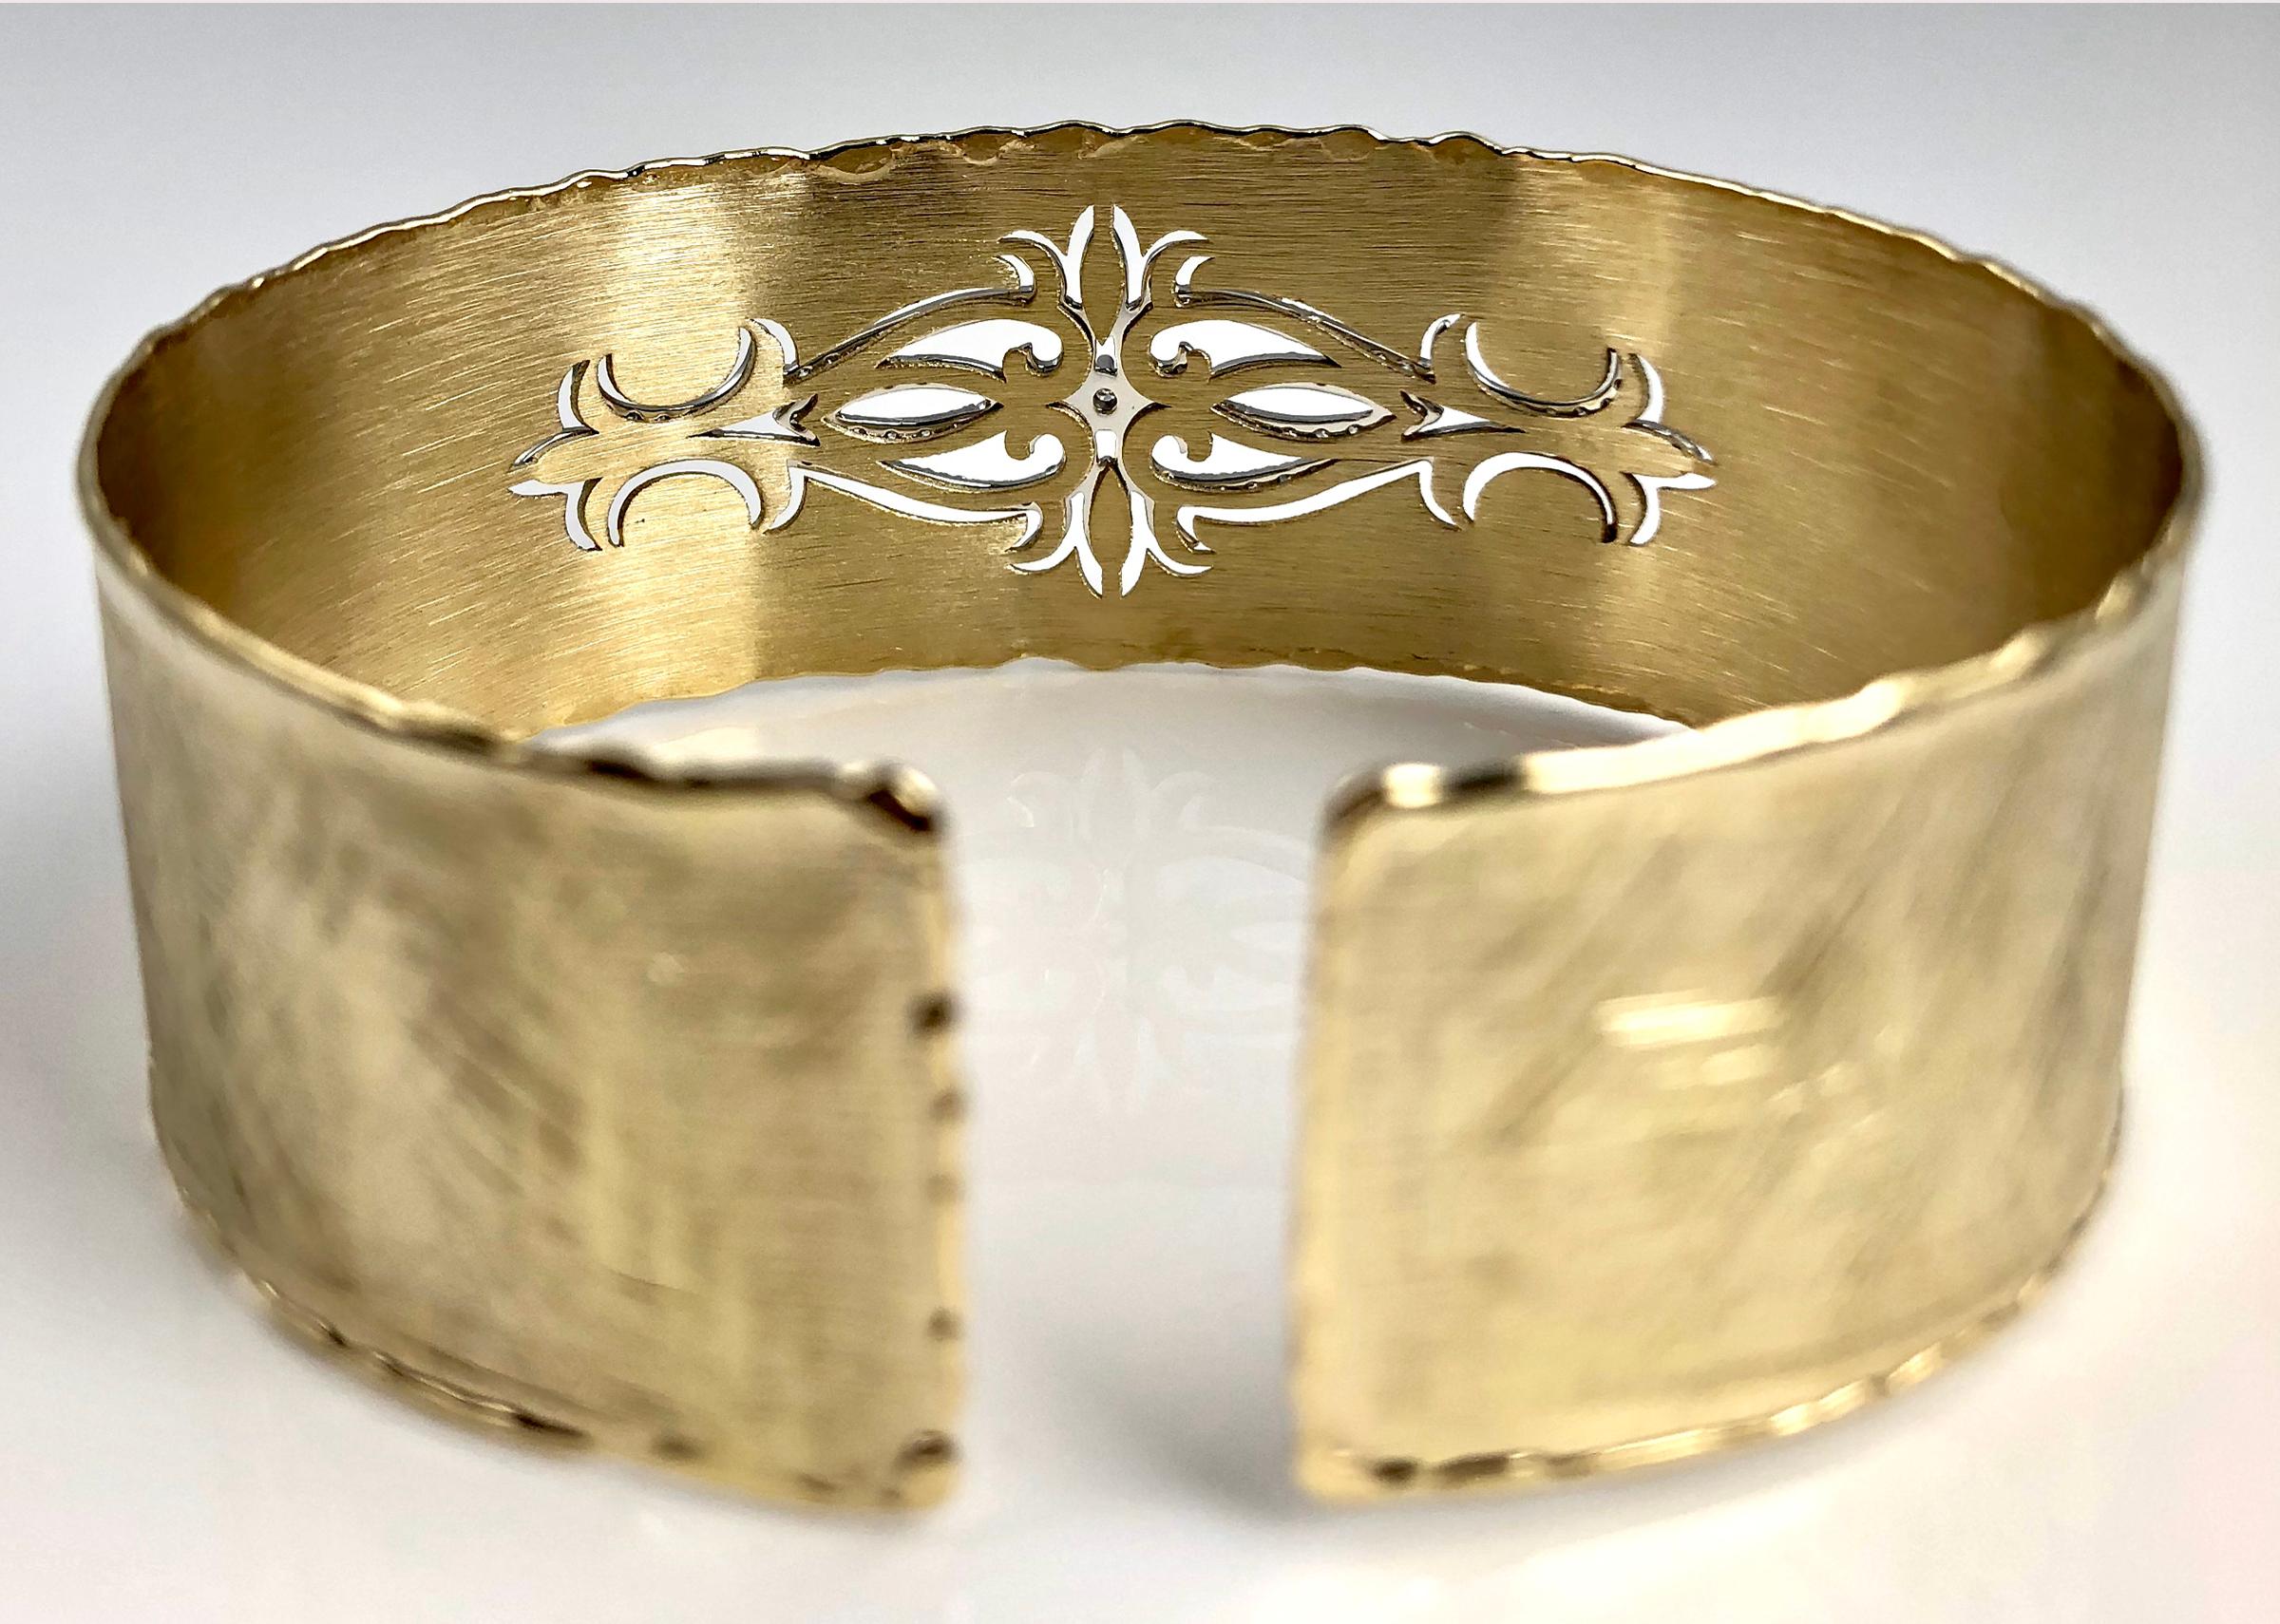 DiamondTown Yellow and White Gold Rustic Bangle with .83 Carat Diamond Accent (Rundschliff)